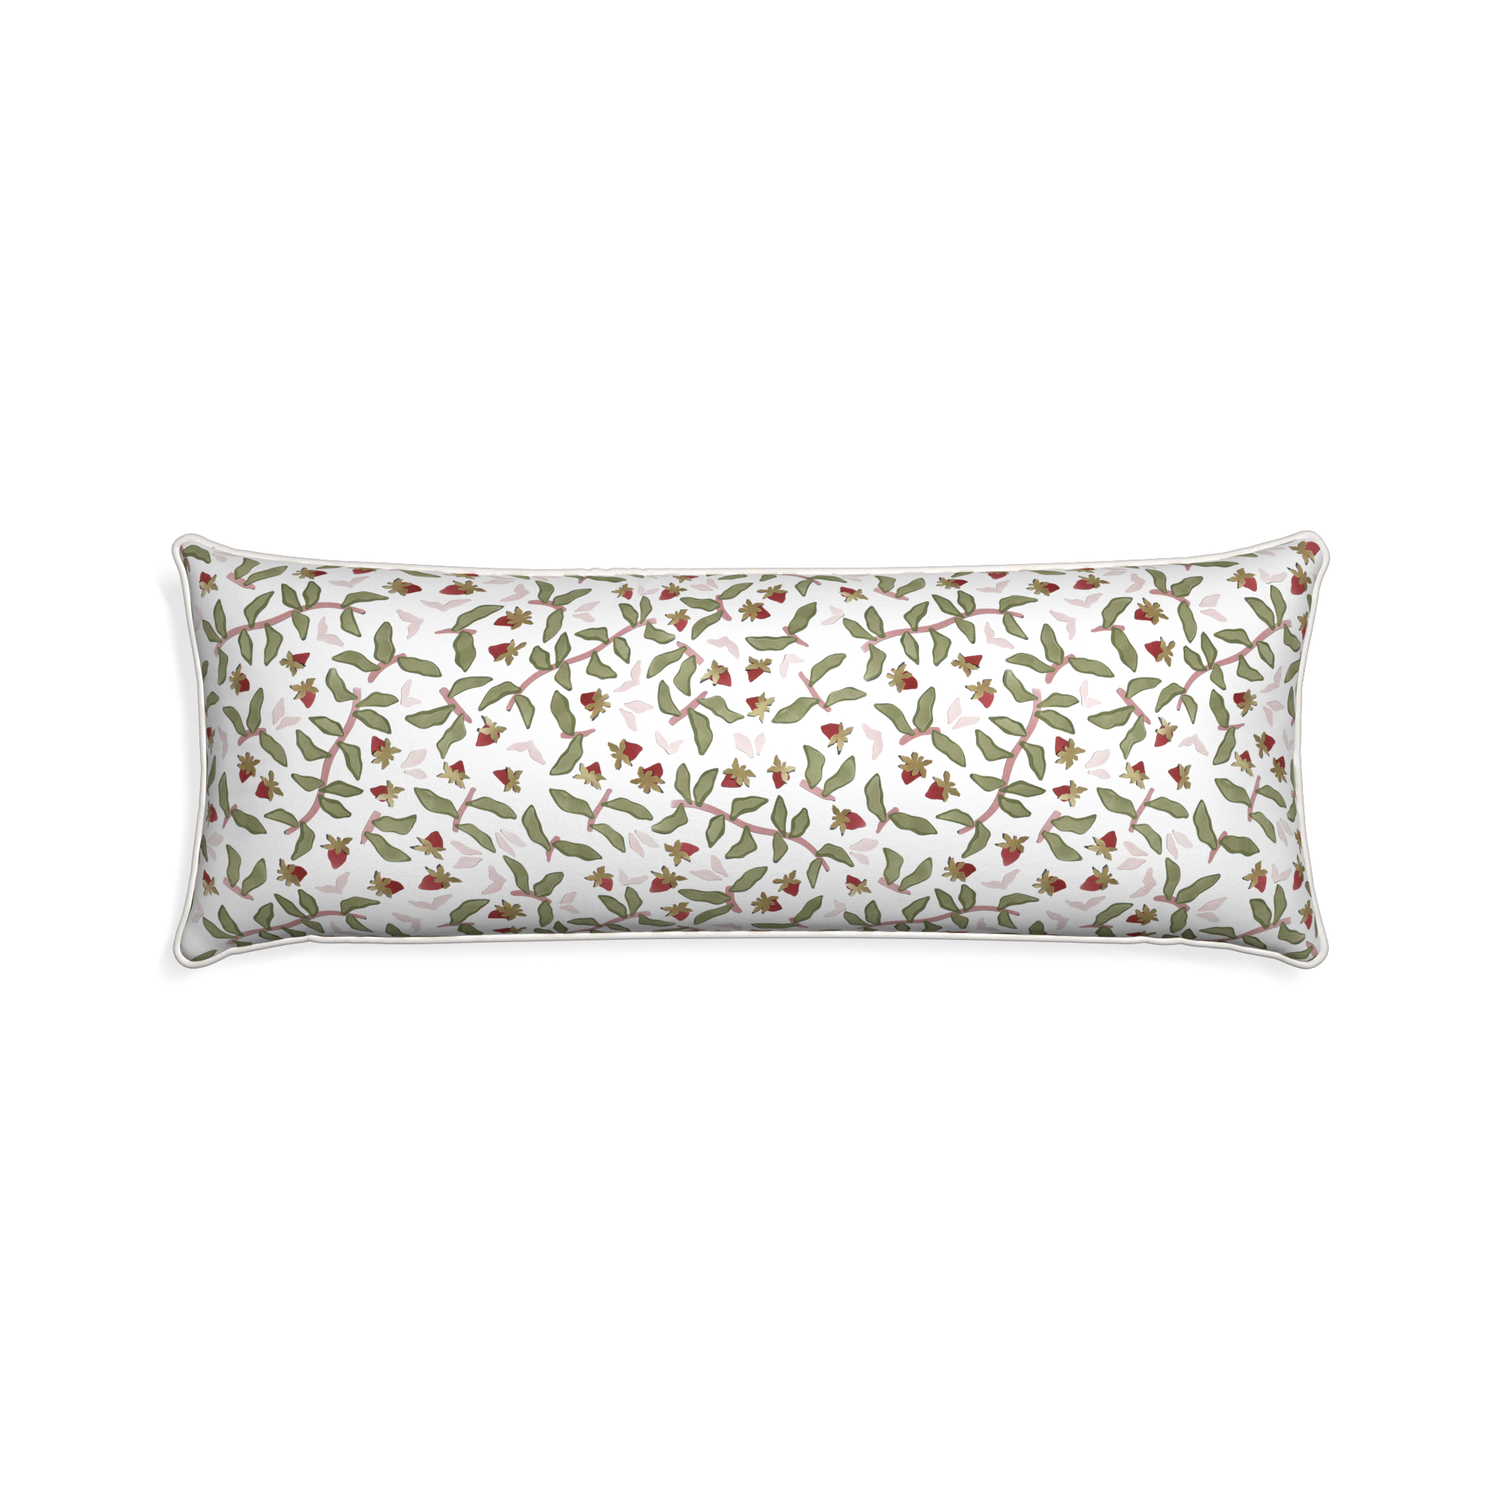 Xl-lumbar nellie custom pillow with snow piping on white background